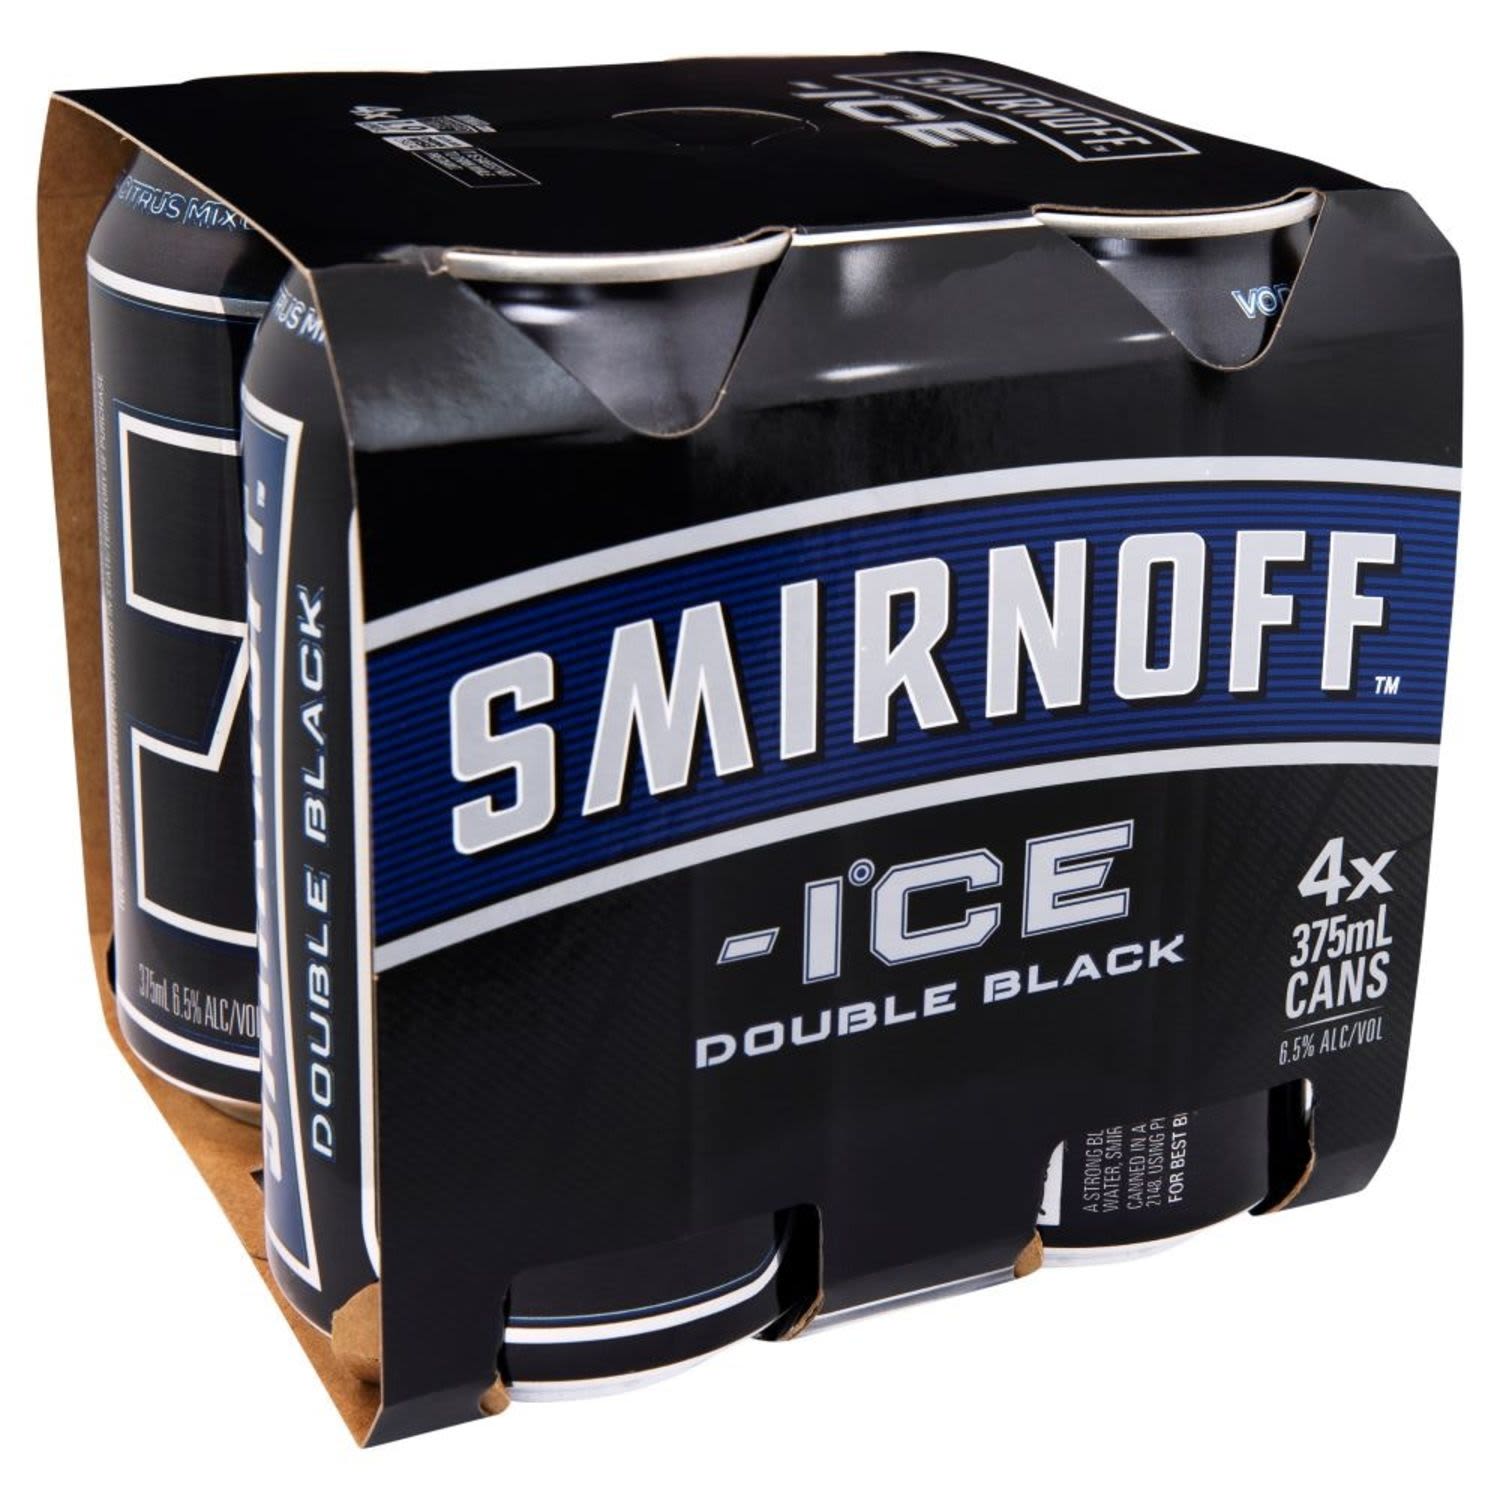 With an extra strong blend of Smirnoff Vodka, Smirnoff Ice Double Black combines a tangy citrus flavoured soda to create a refreshing drink<br /> <br />Alcohol Volume: 6.50%<br /><br />Pack Format: 4 Pack<br /><br />Standard Drinks: 1.9</br /><br />Pack Type: Can<br />